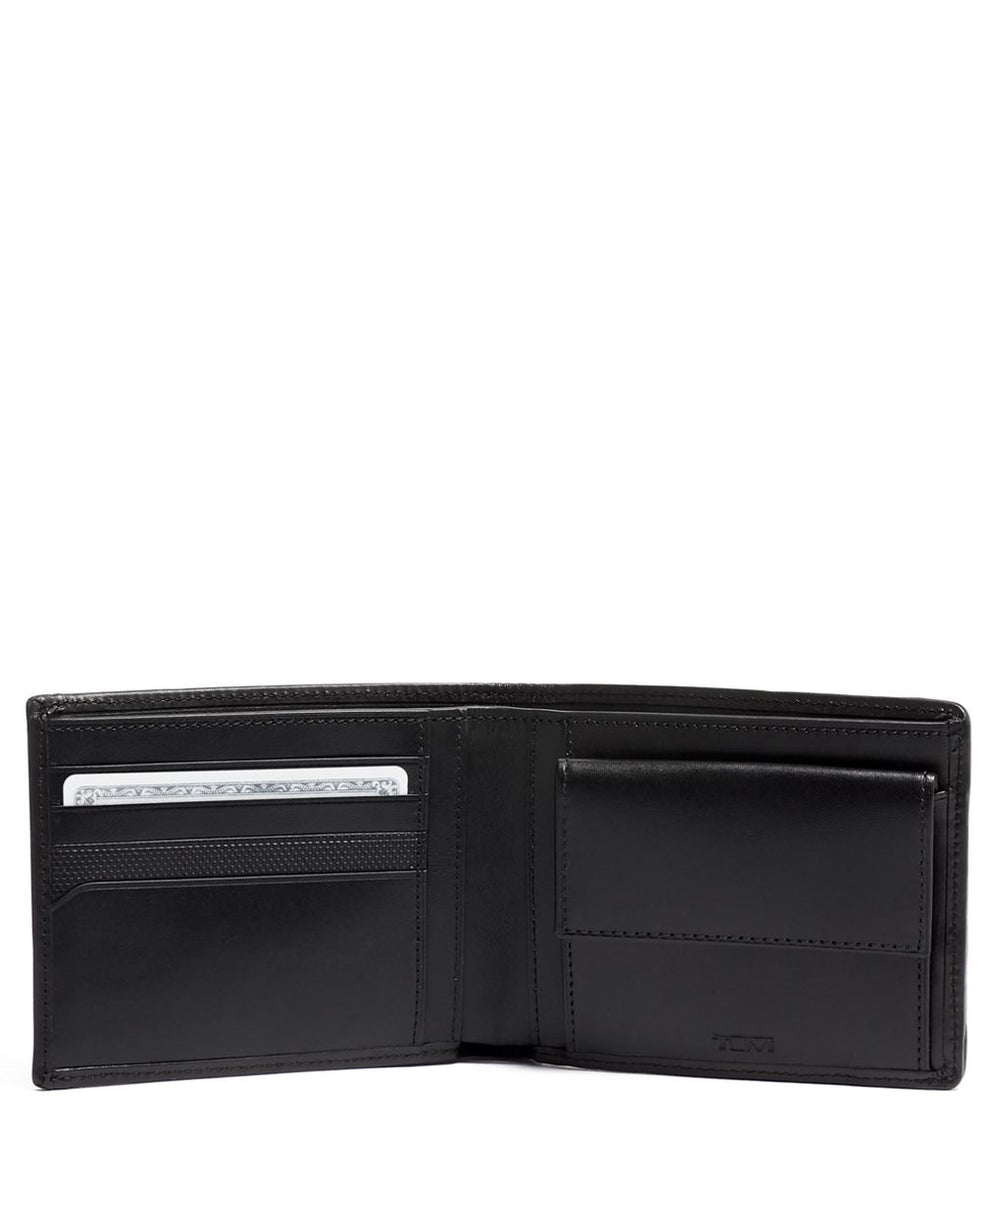 Global Wallet With Coin Pocket